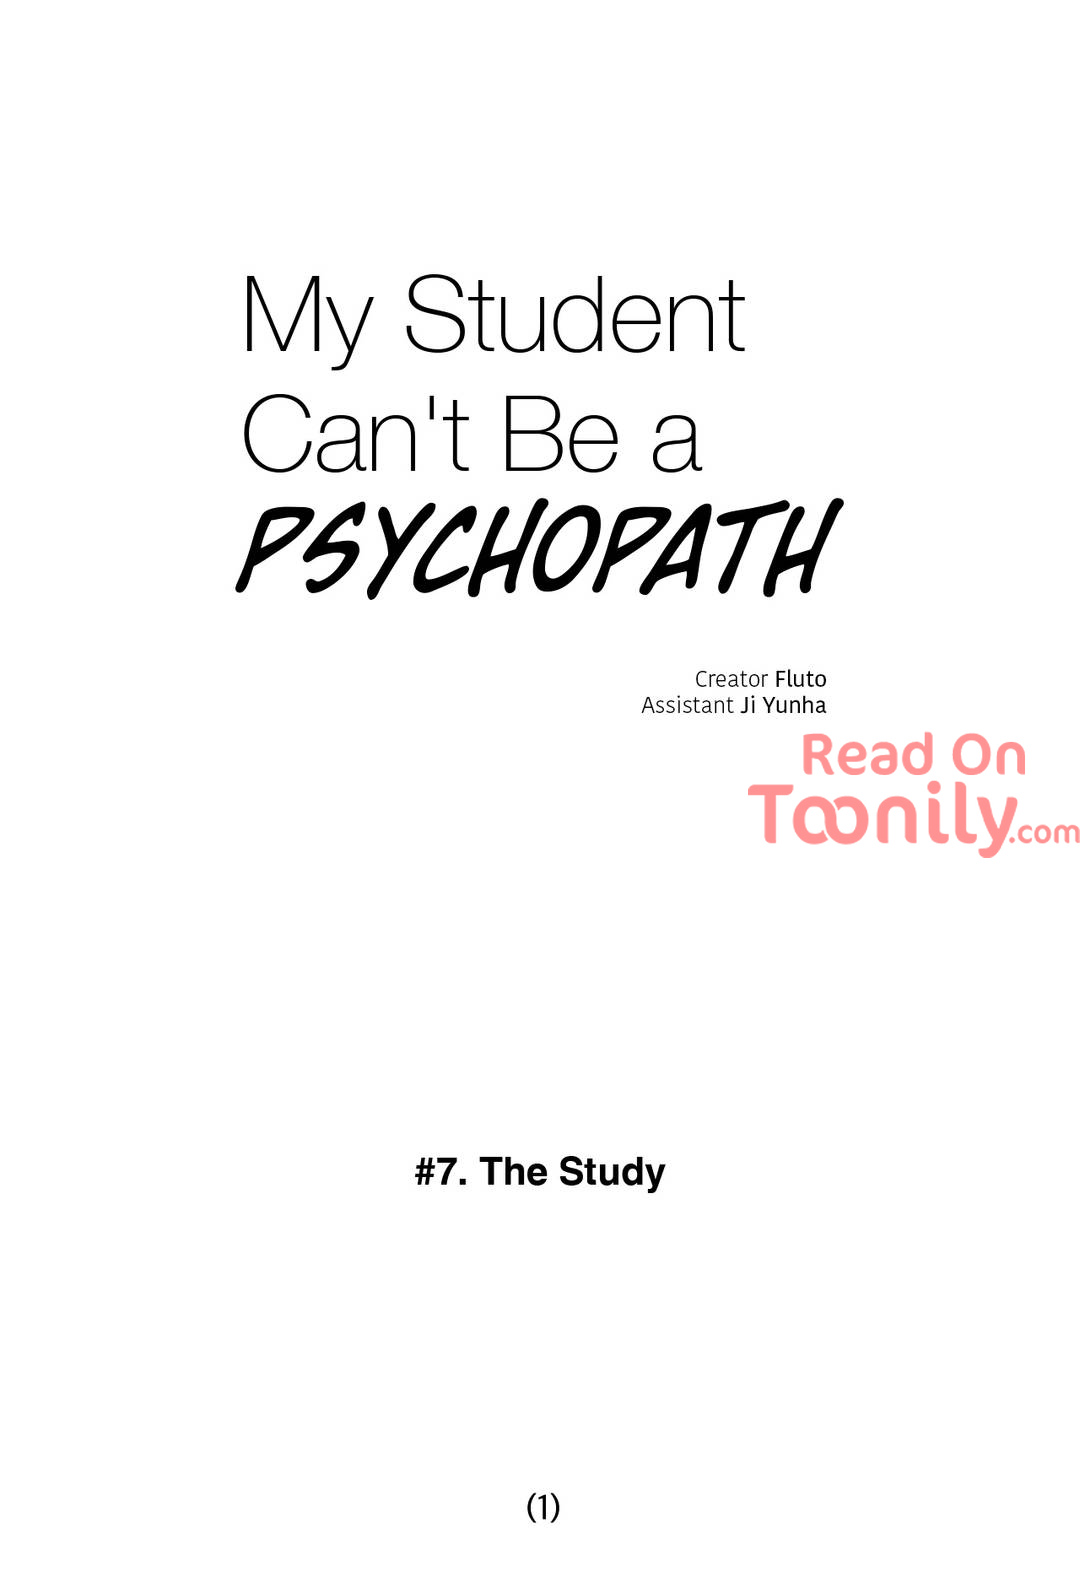 My Student Can’t Be a Psychopath image